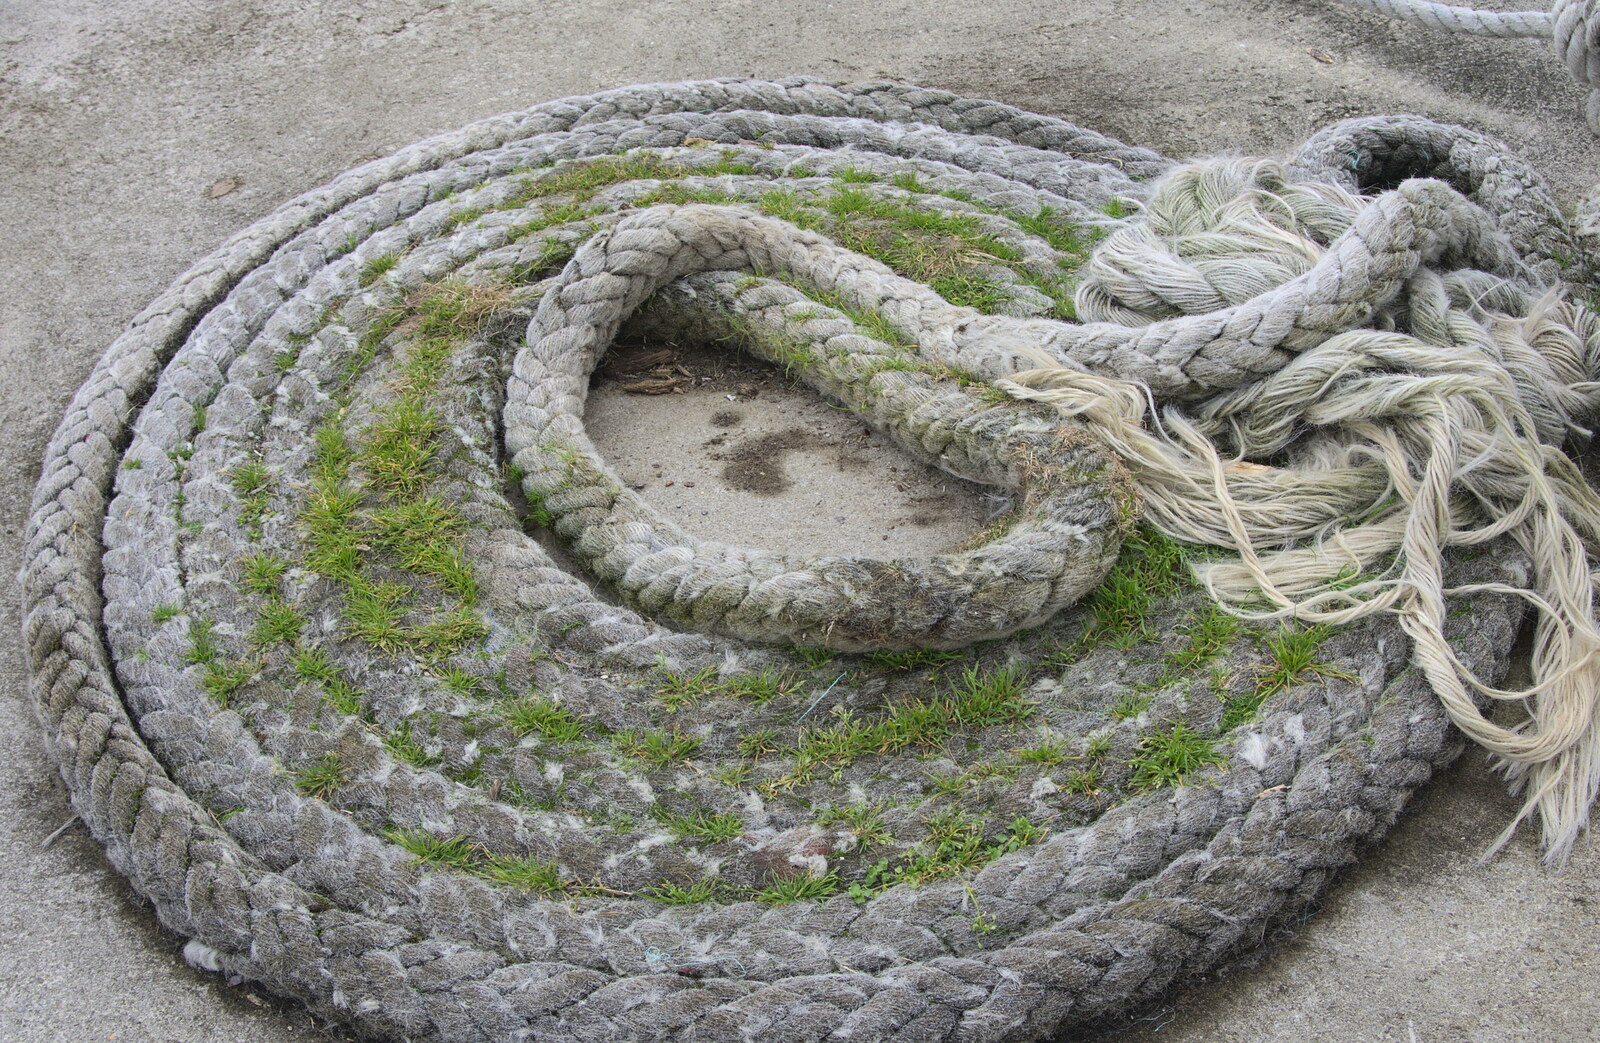 Moss reclaims a coil of old rope from A Seafari Boat Trip, Kenmare, Kerry, Ireland - 3rd August 2017